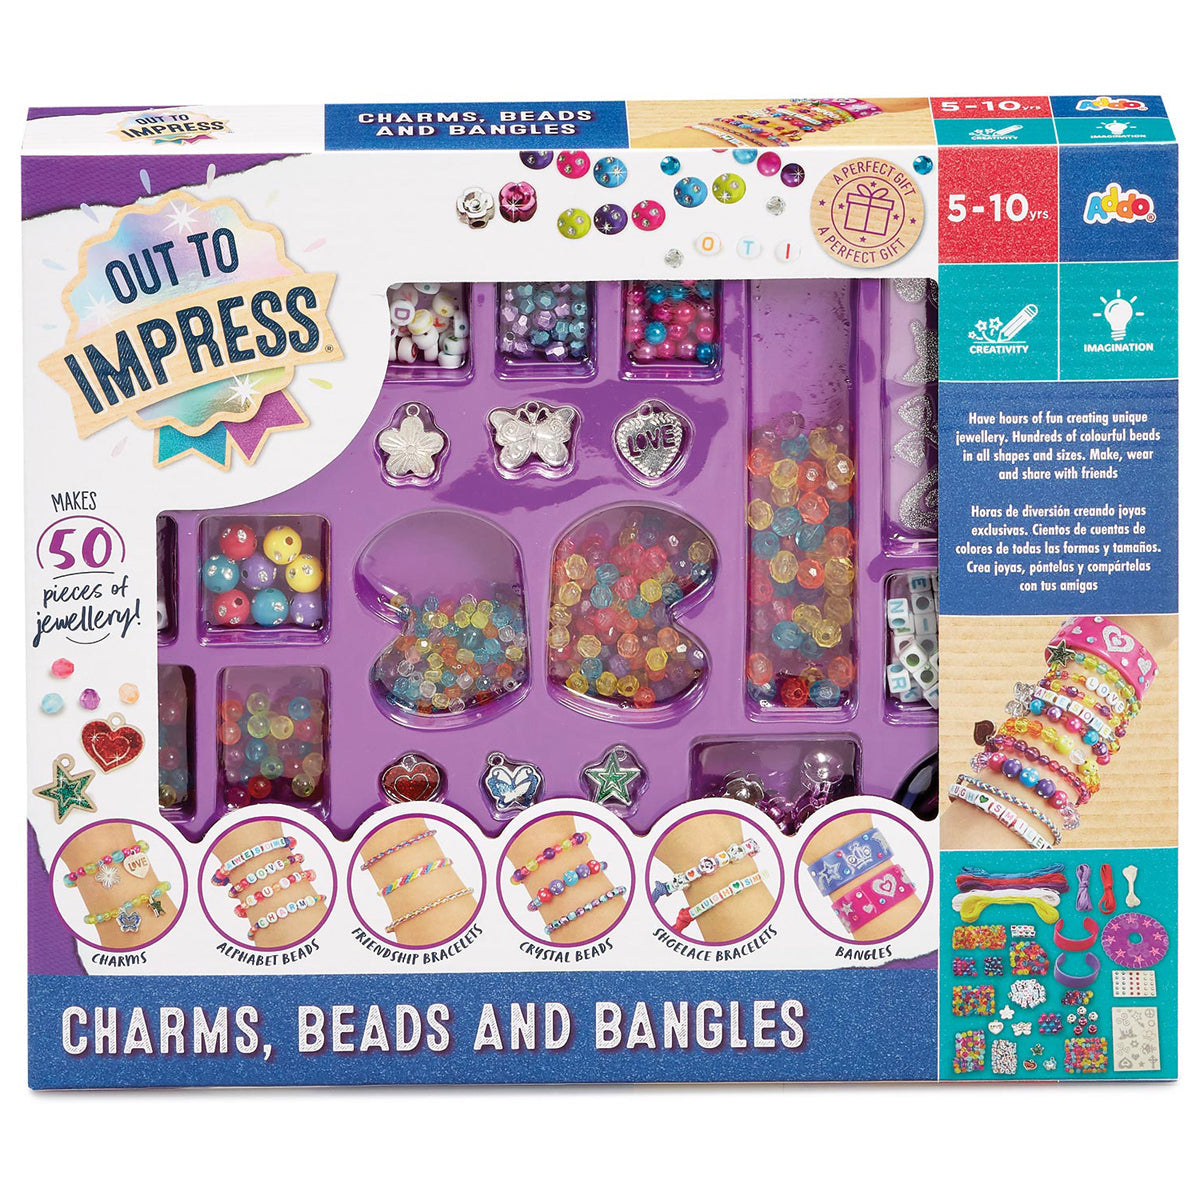 Out to Impress Charms, Beads and Bangles Kit